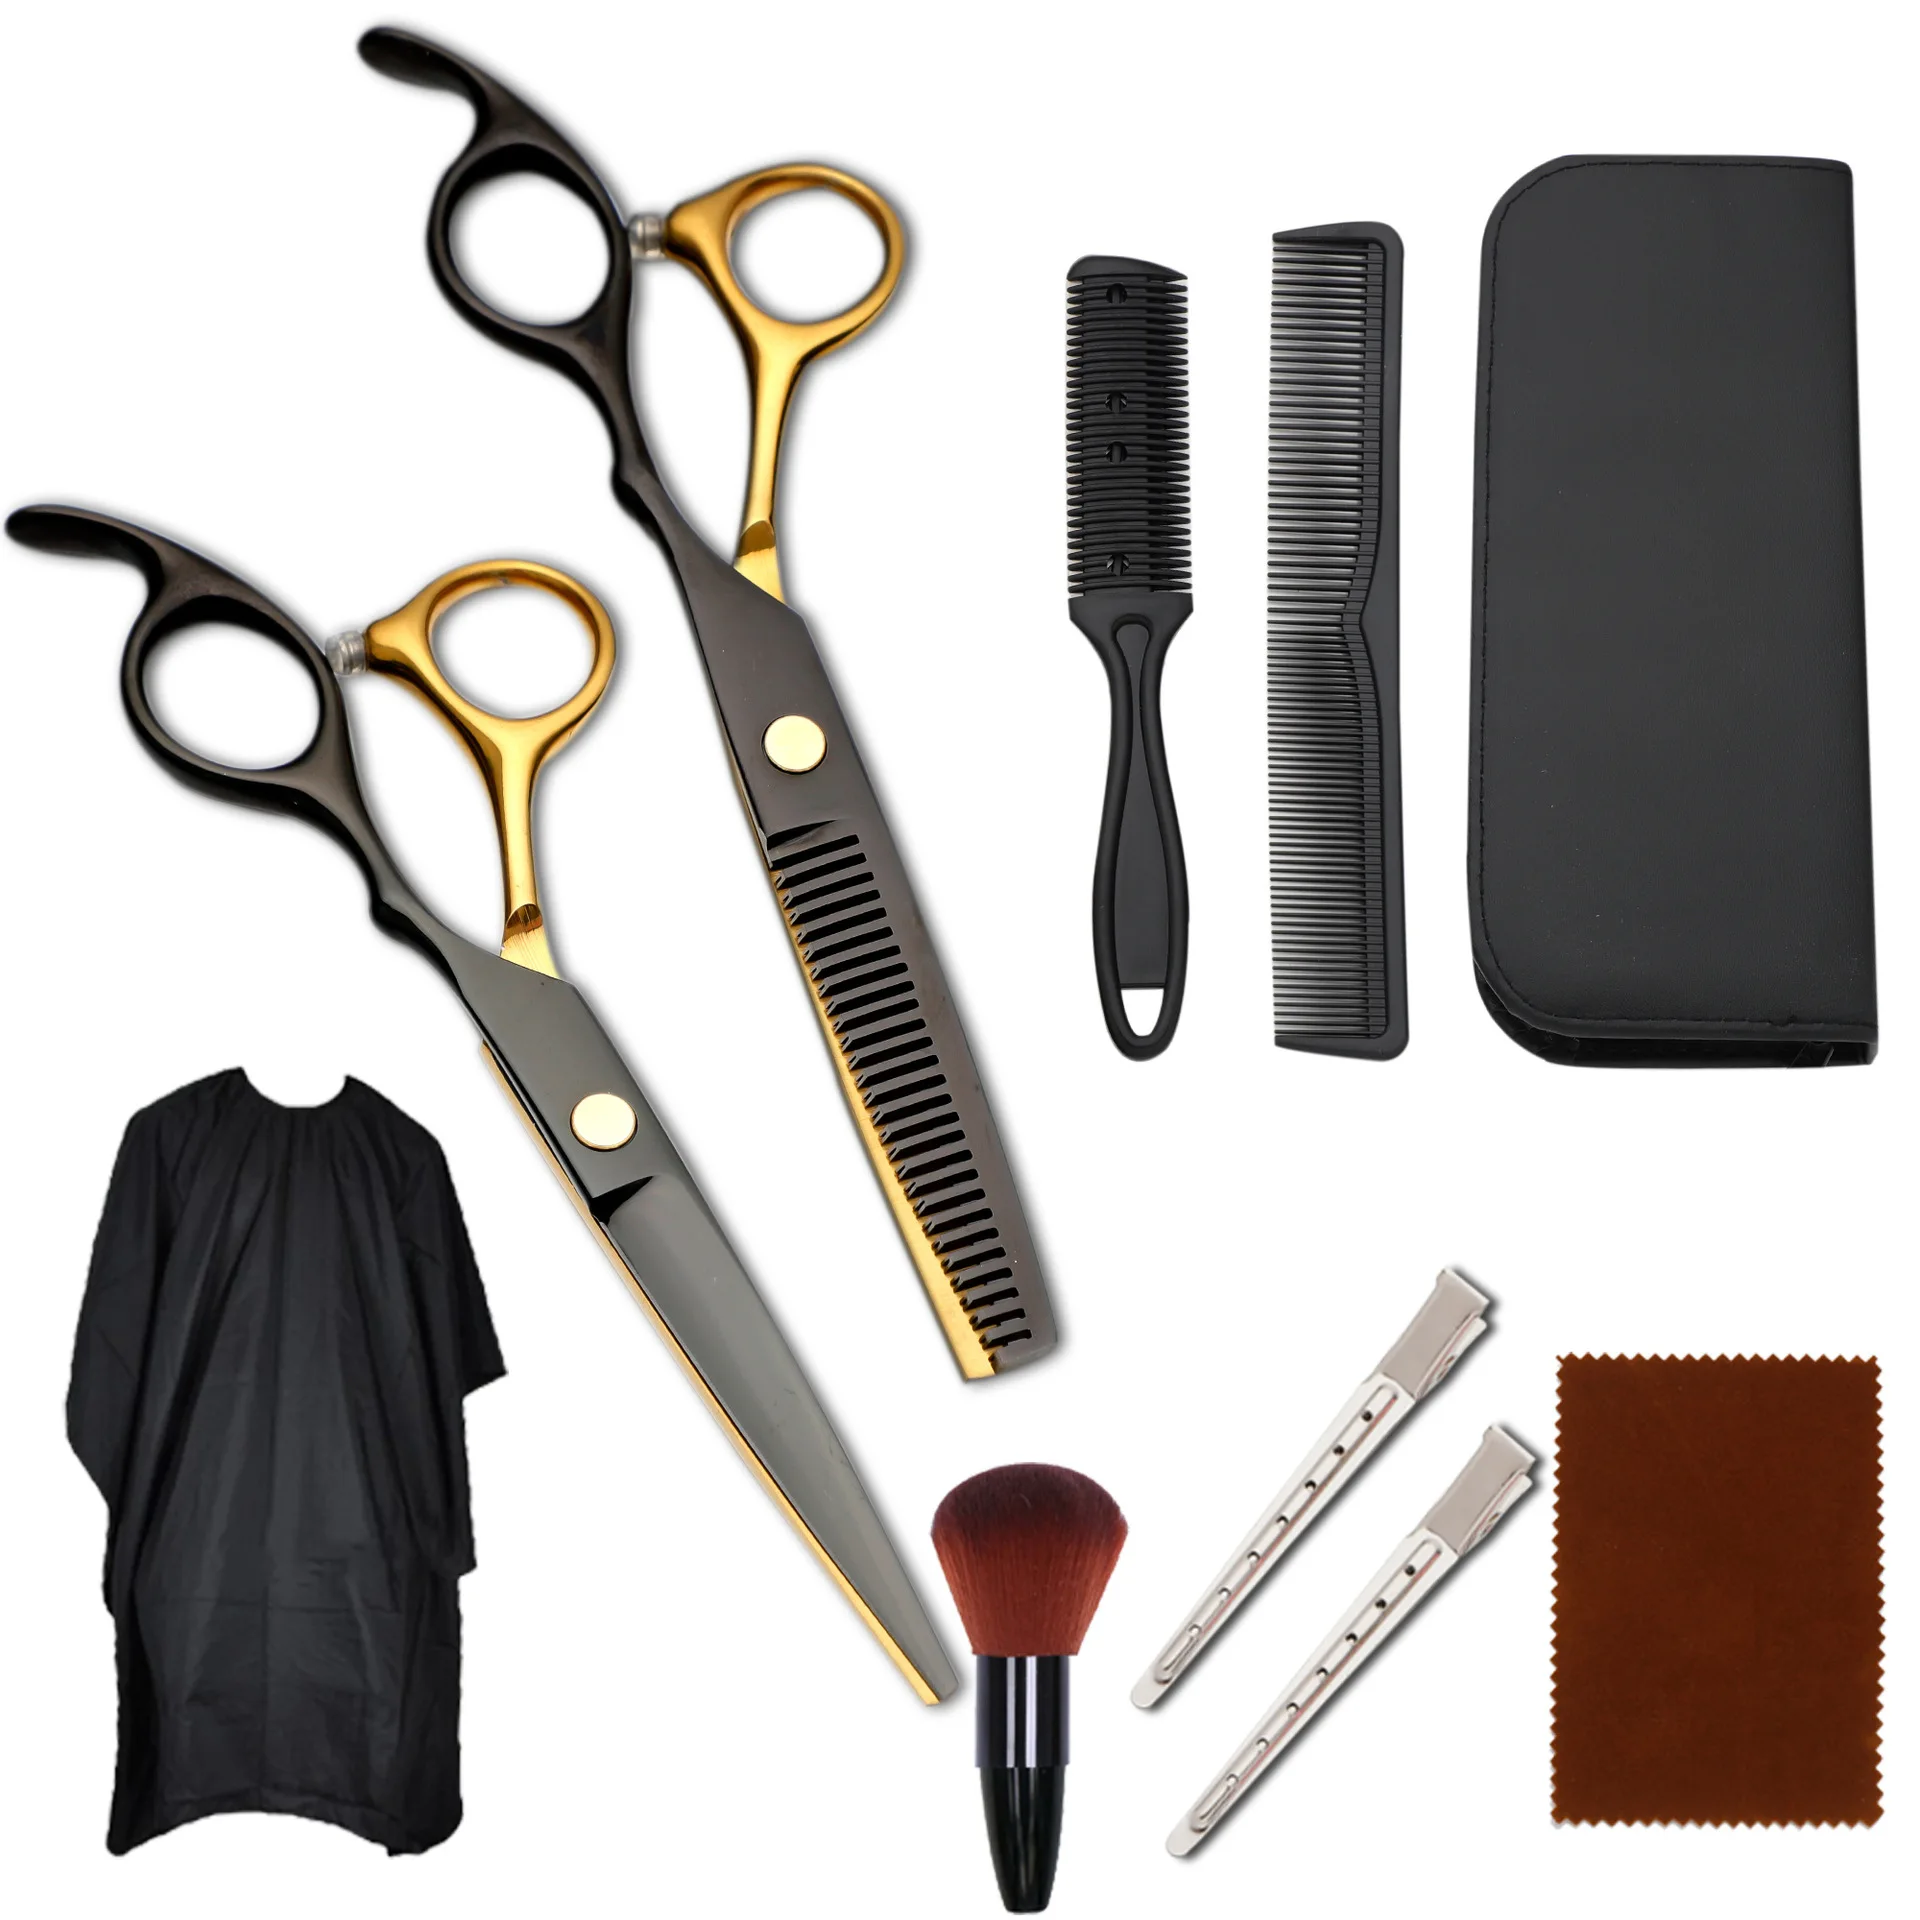 thinning and cutting hair scissors household 2cr 6 hairdressing shear styling tool sharp thinning scissor haircutting utensils 6inch Profissional Hairdressing Scissor Hair Cutting Set double-ended comb kit Barber Shear black/gold Salon Multi-color optiona